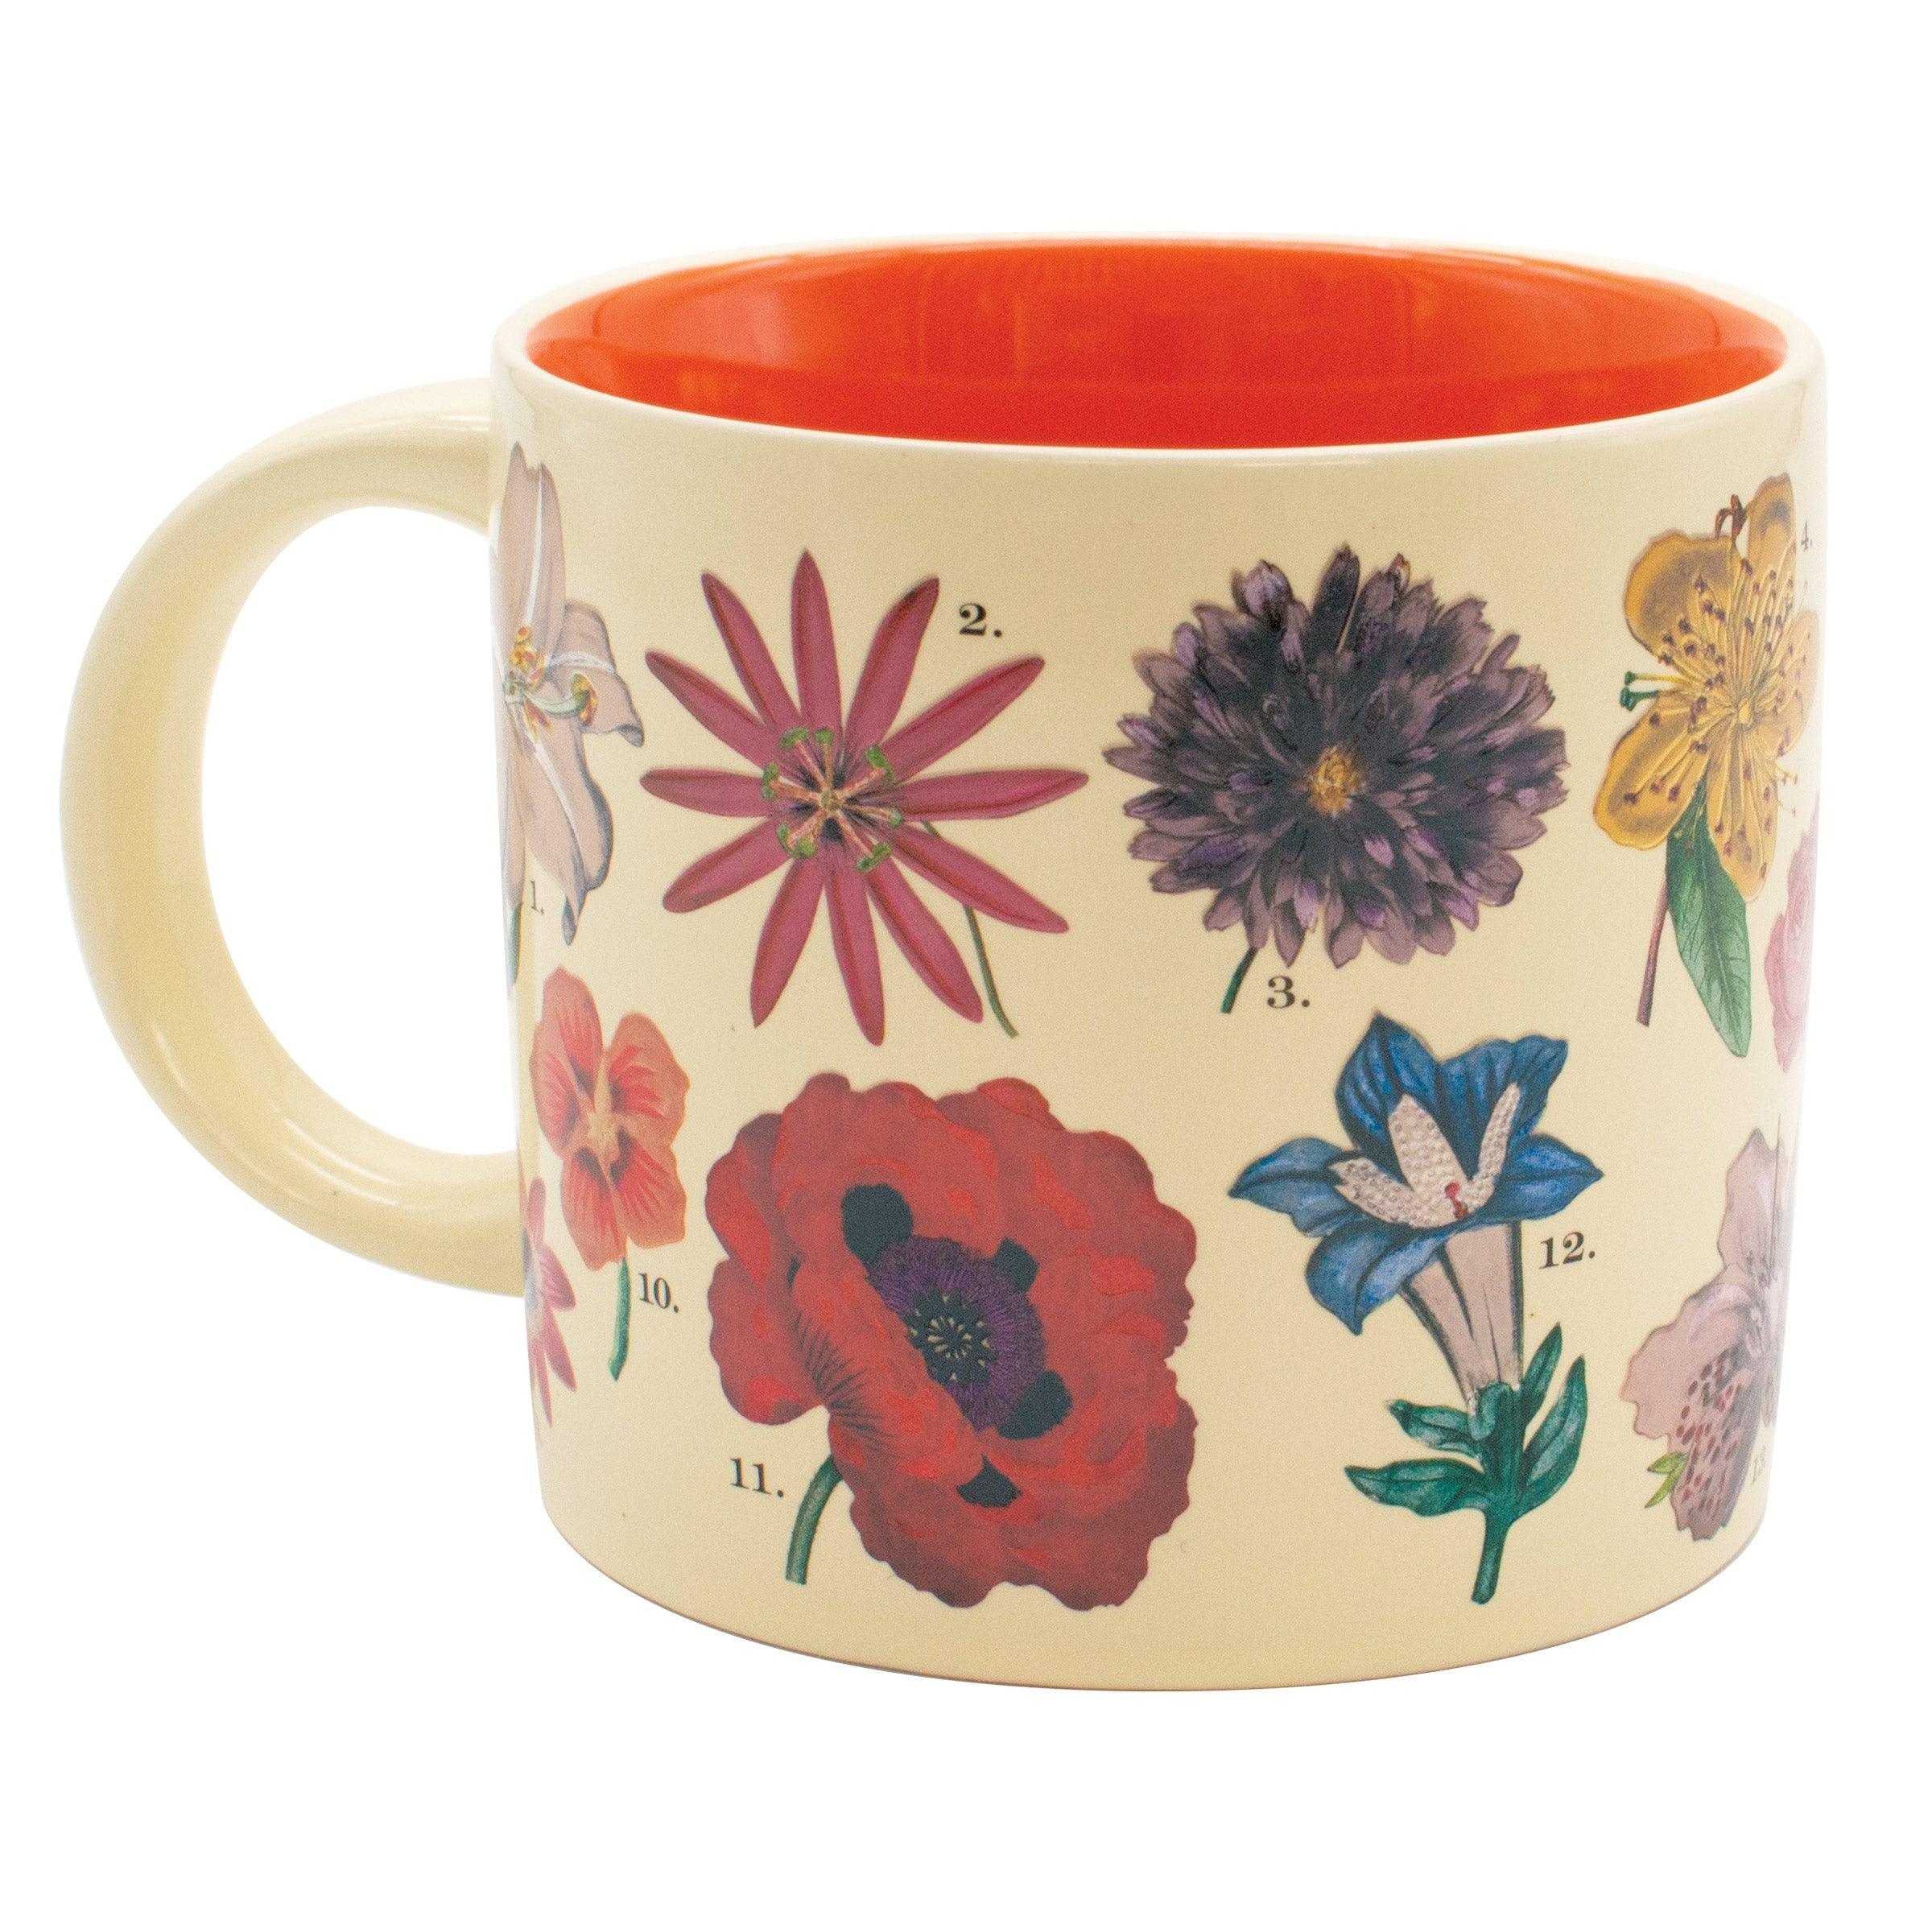 Product photo of Flowers Mug, a novelty gift manufactured by The Unemployed Philosophers Guild.